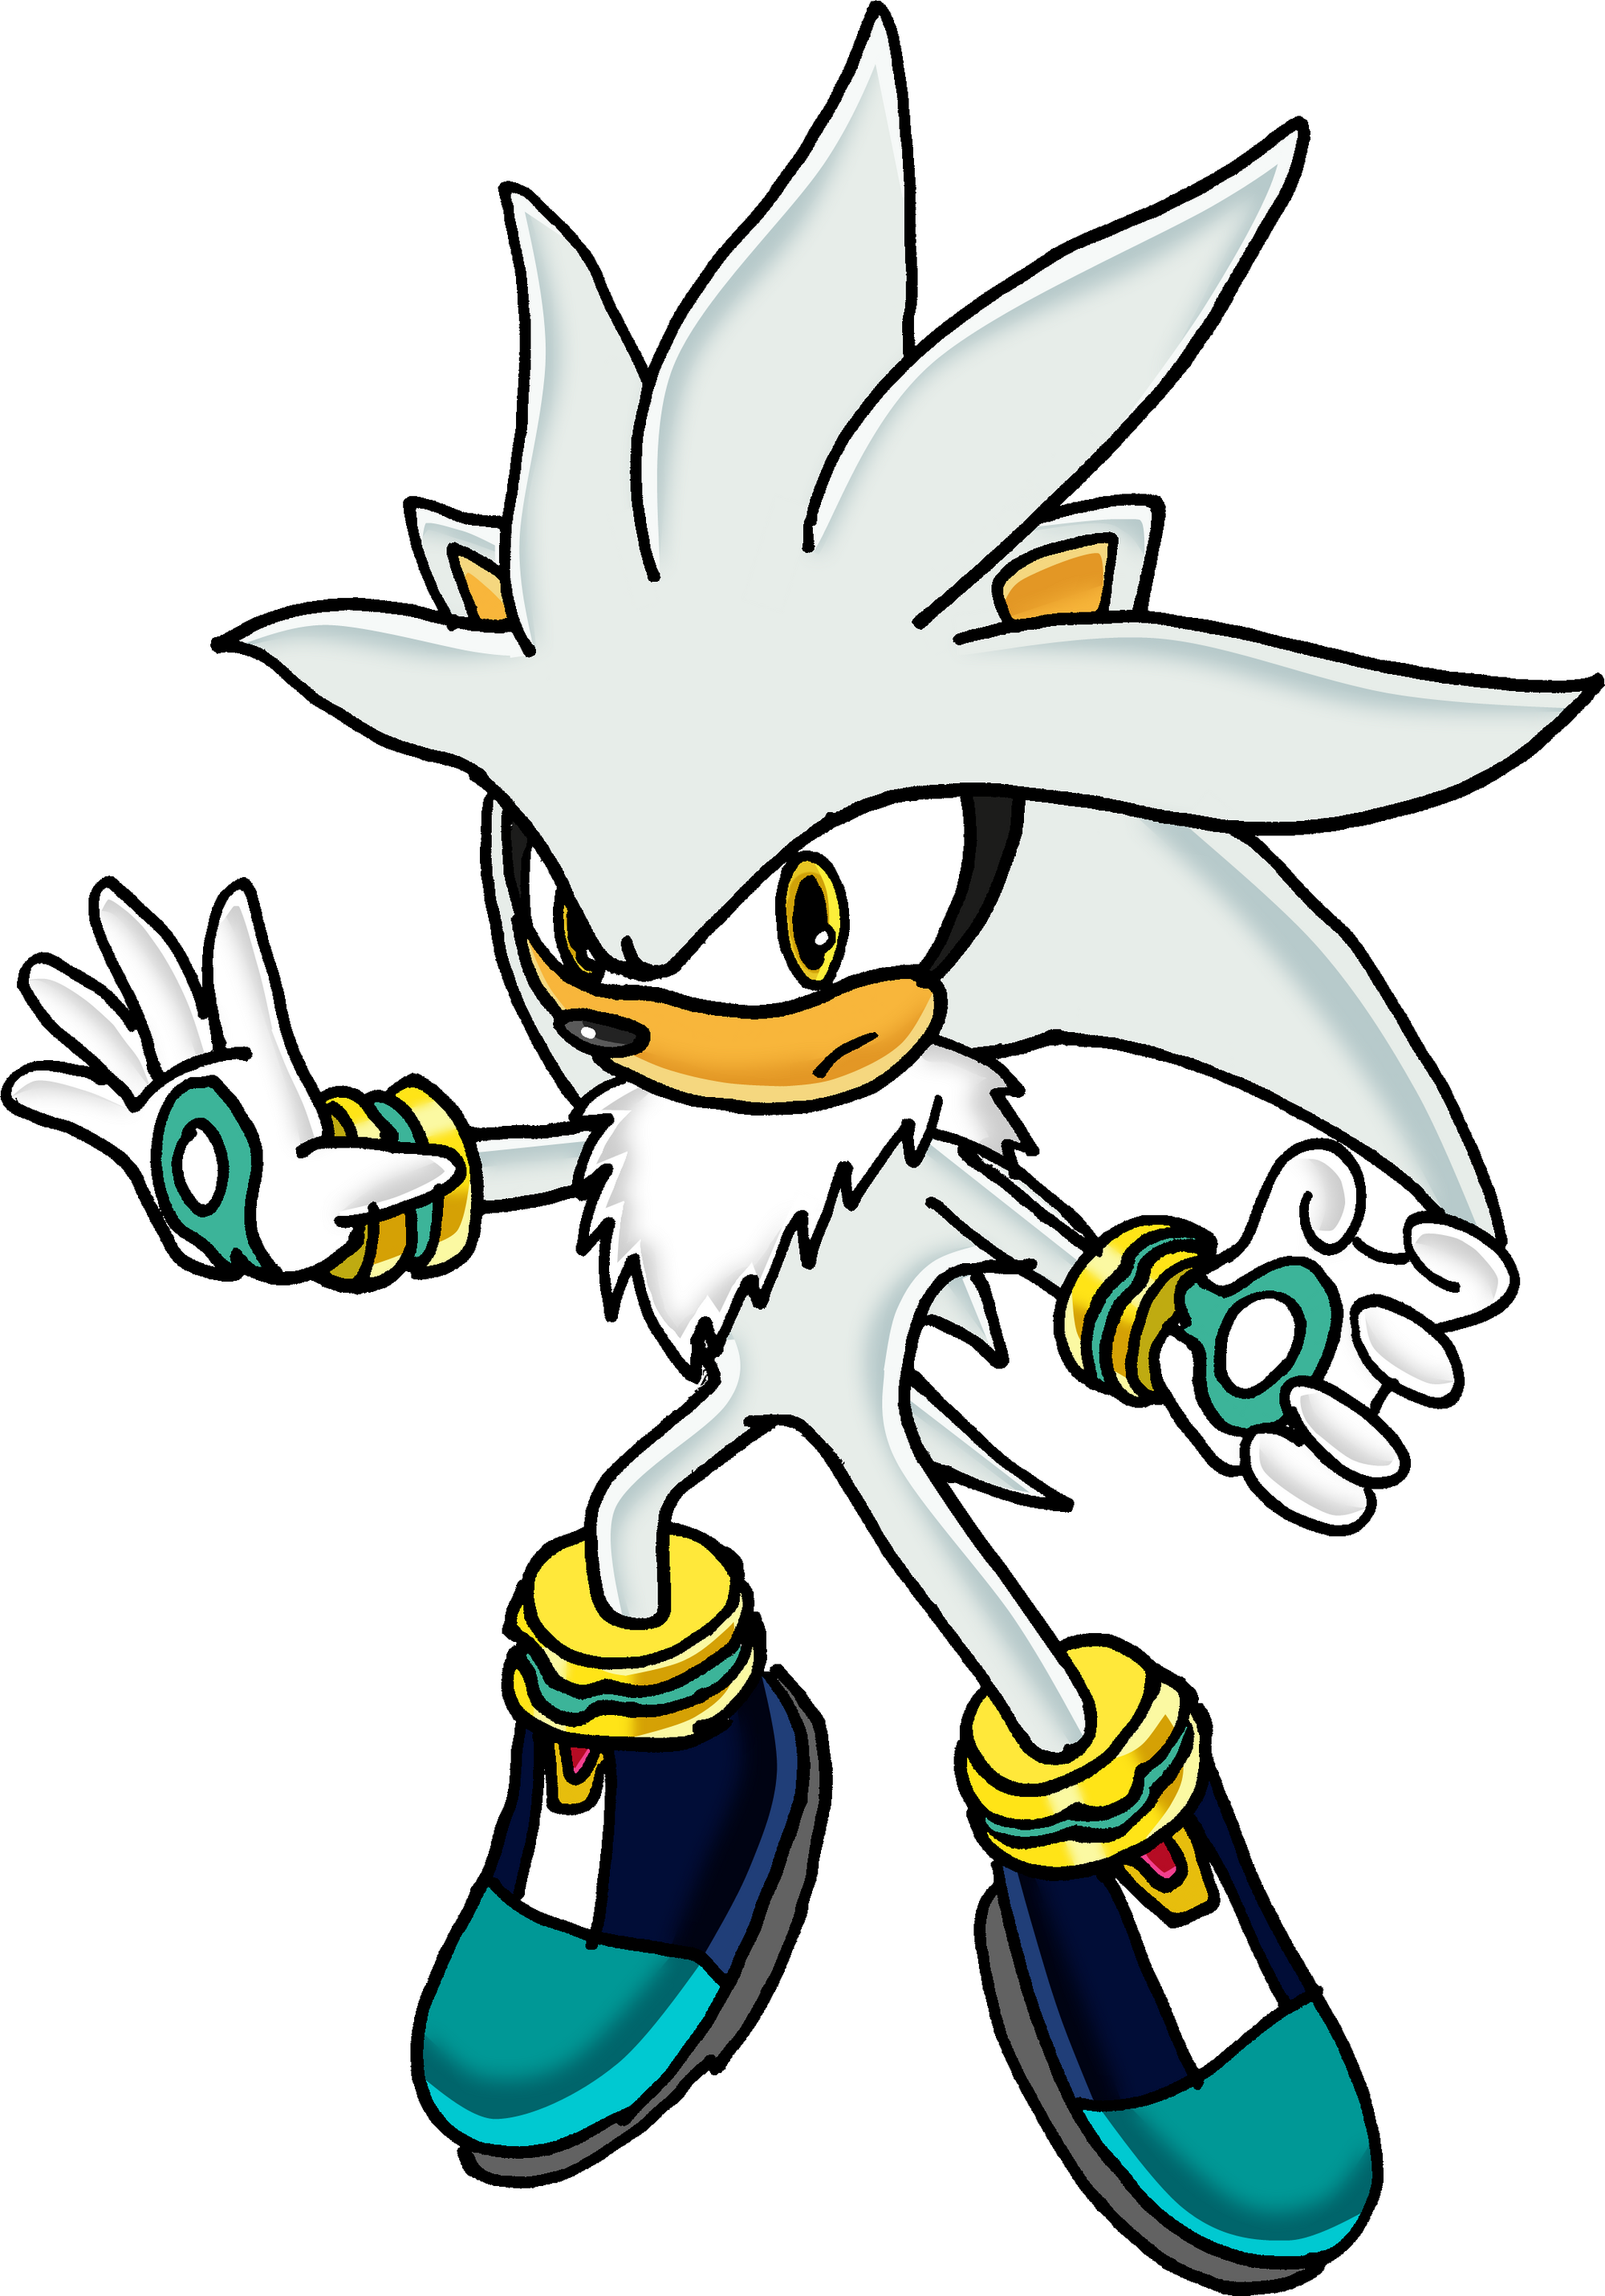 Image Silver The Hedgehogpng Sonic News Network Fandom Powered